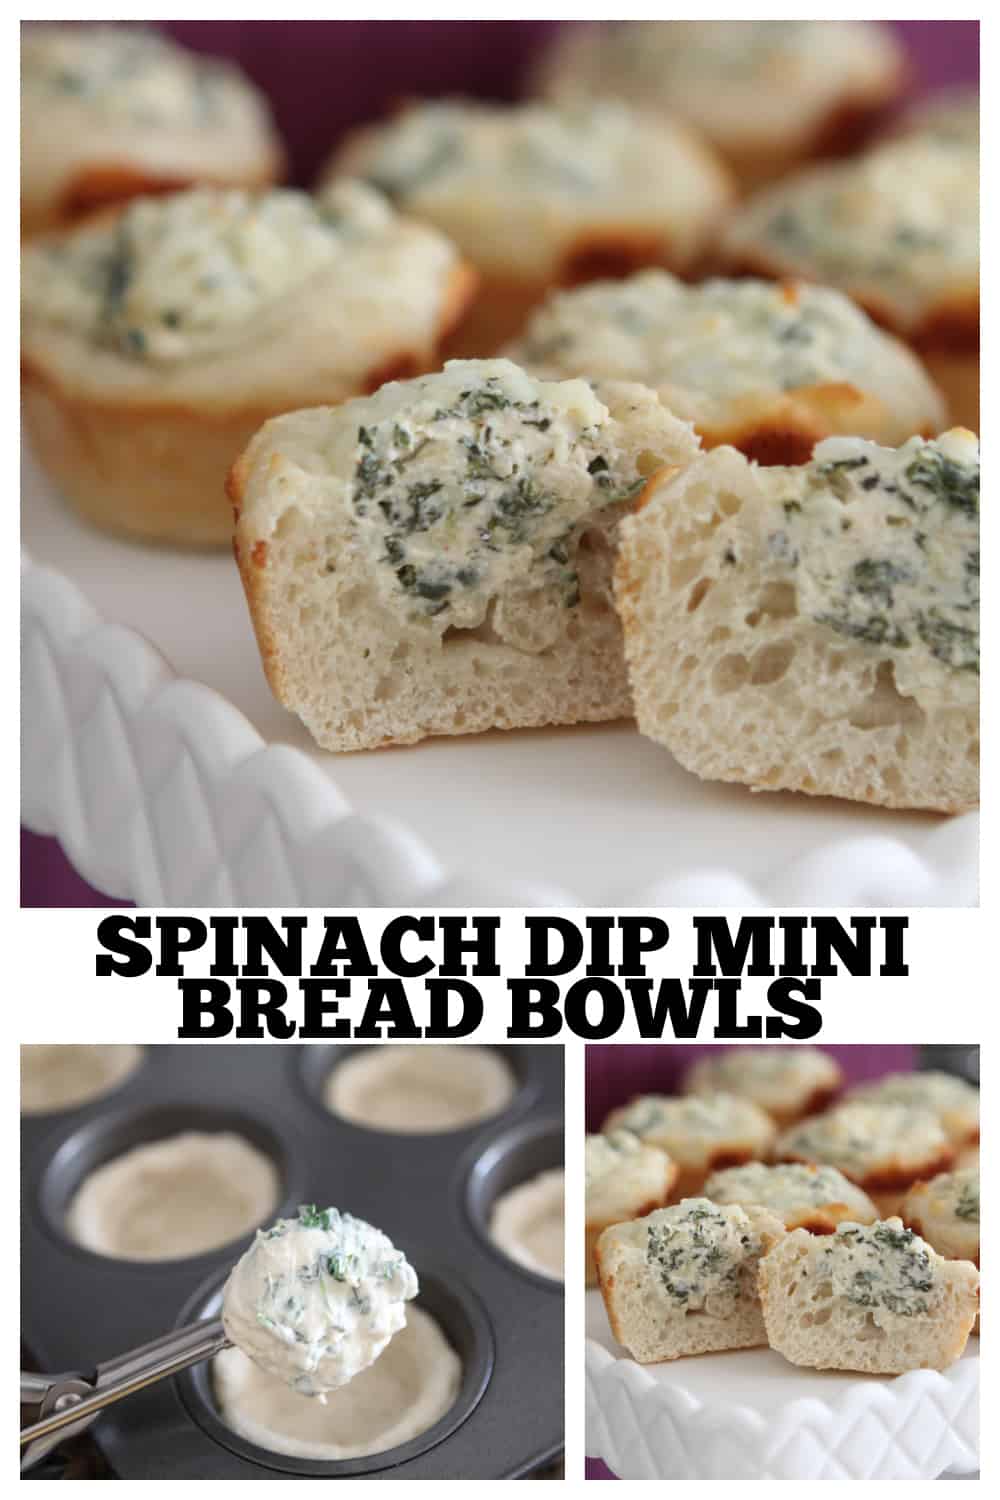 photo collage of spinach dip bread bowls